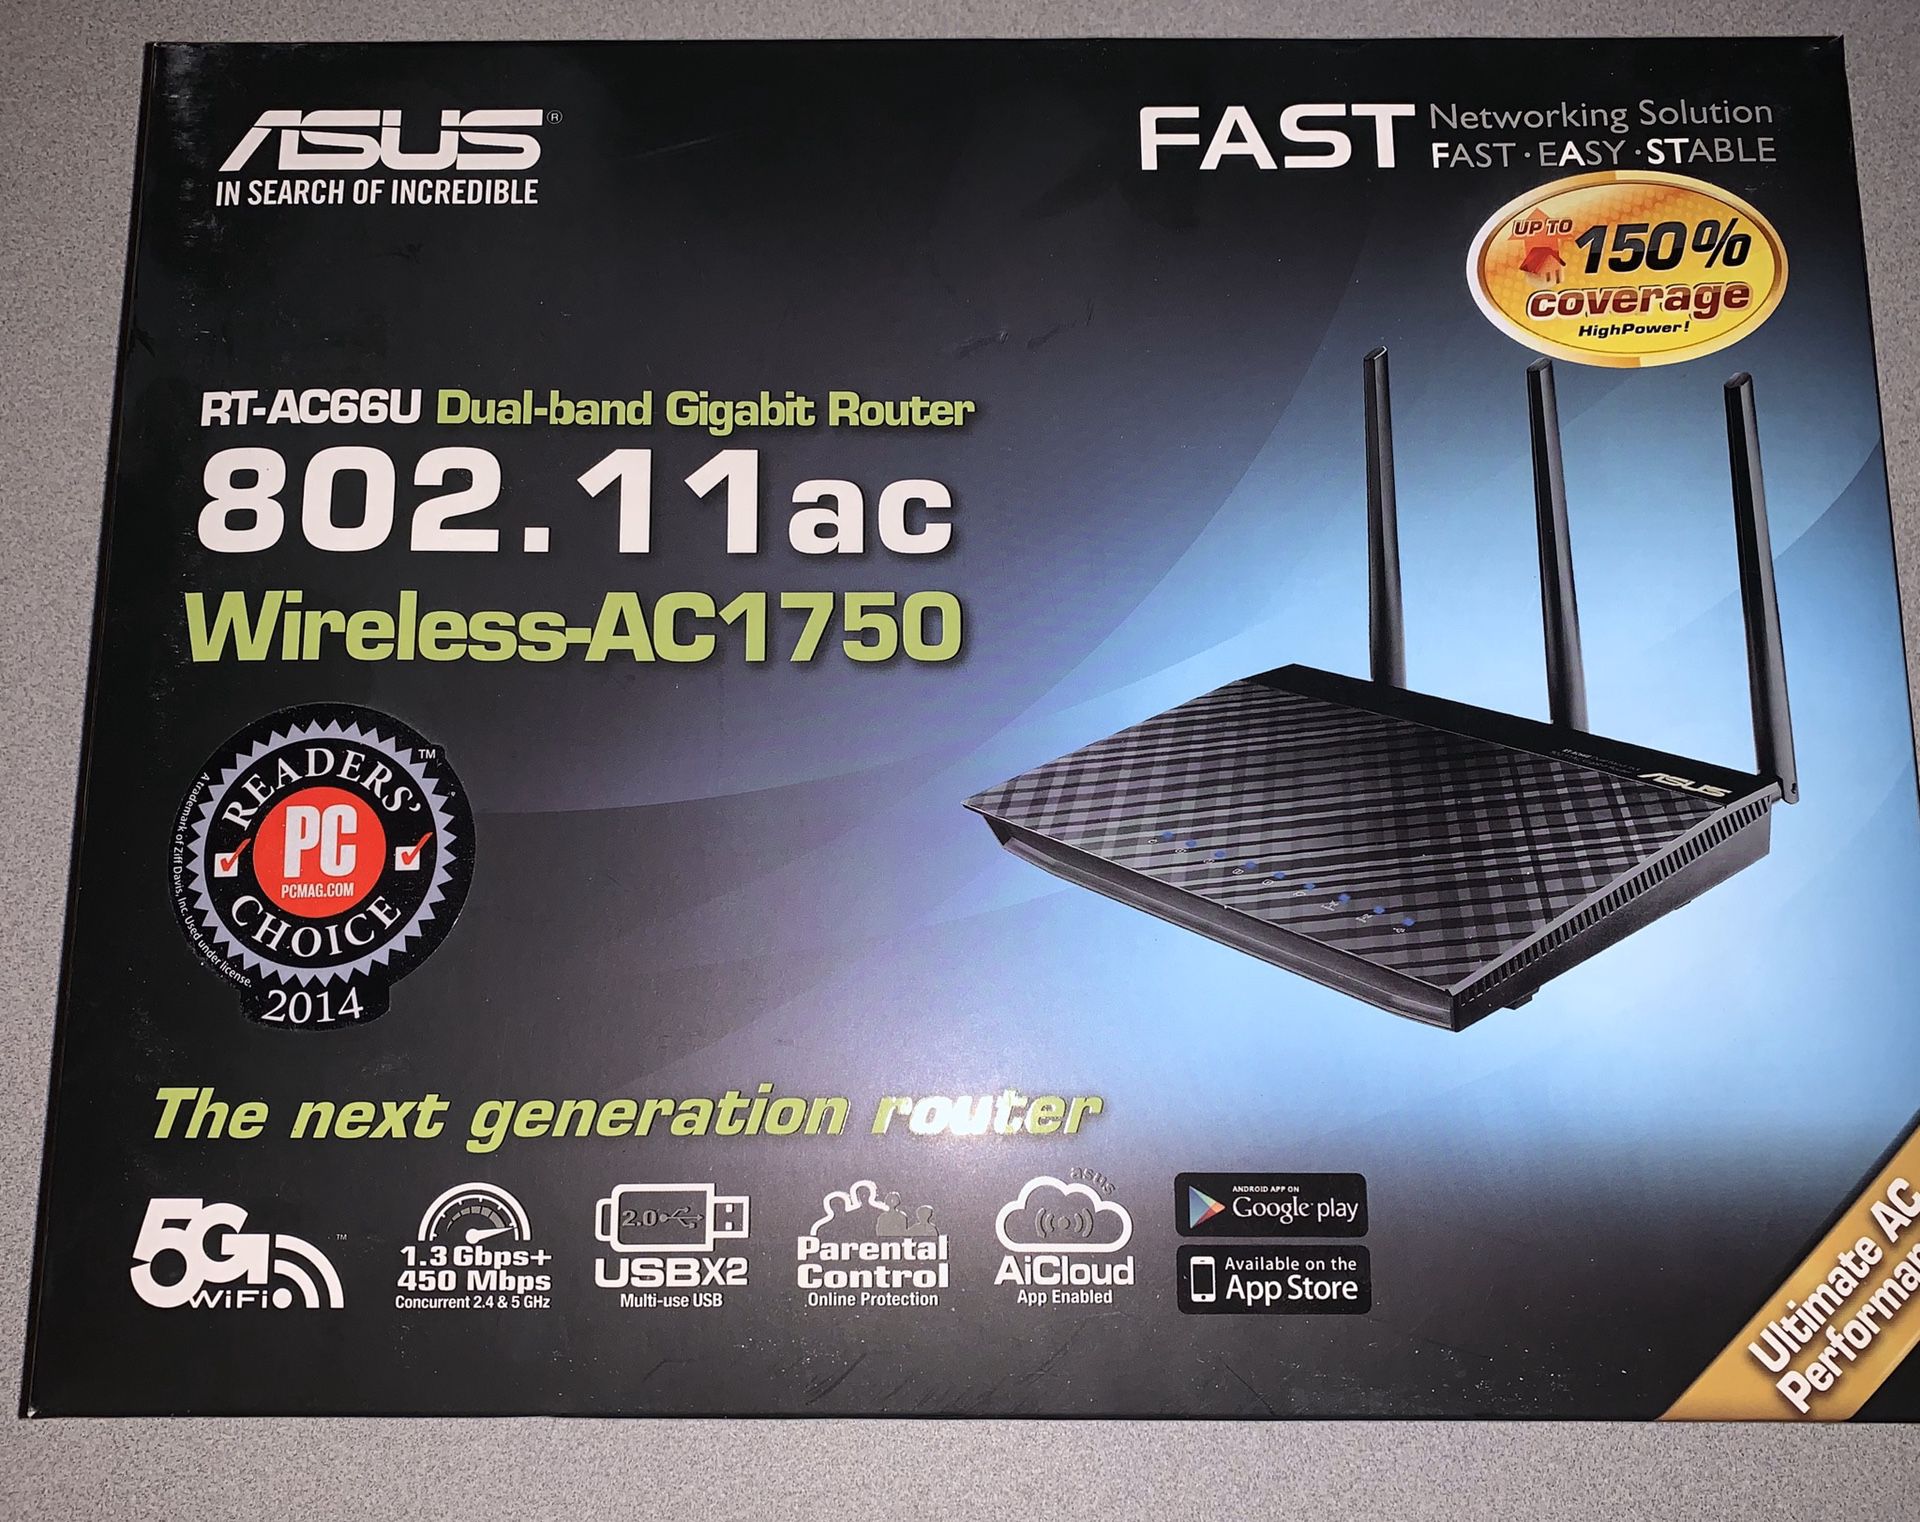 ASUS Wireless-AC1700 Dual Band Gigabit Router (up to 1700 Mbps) with USB 3.0 (RT-ACRH17)